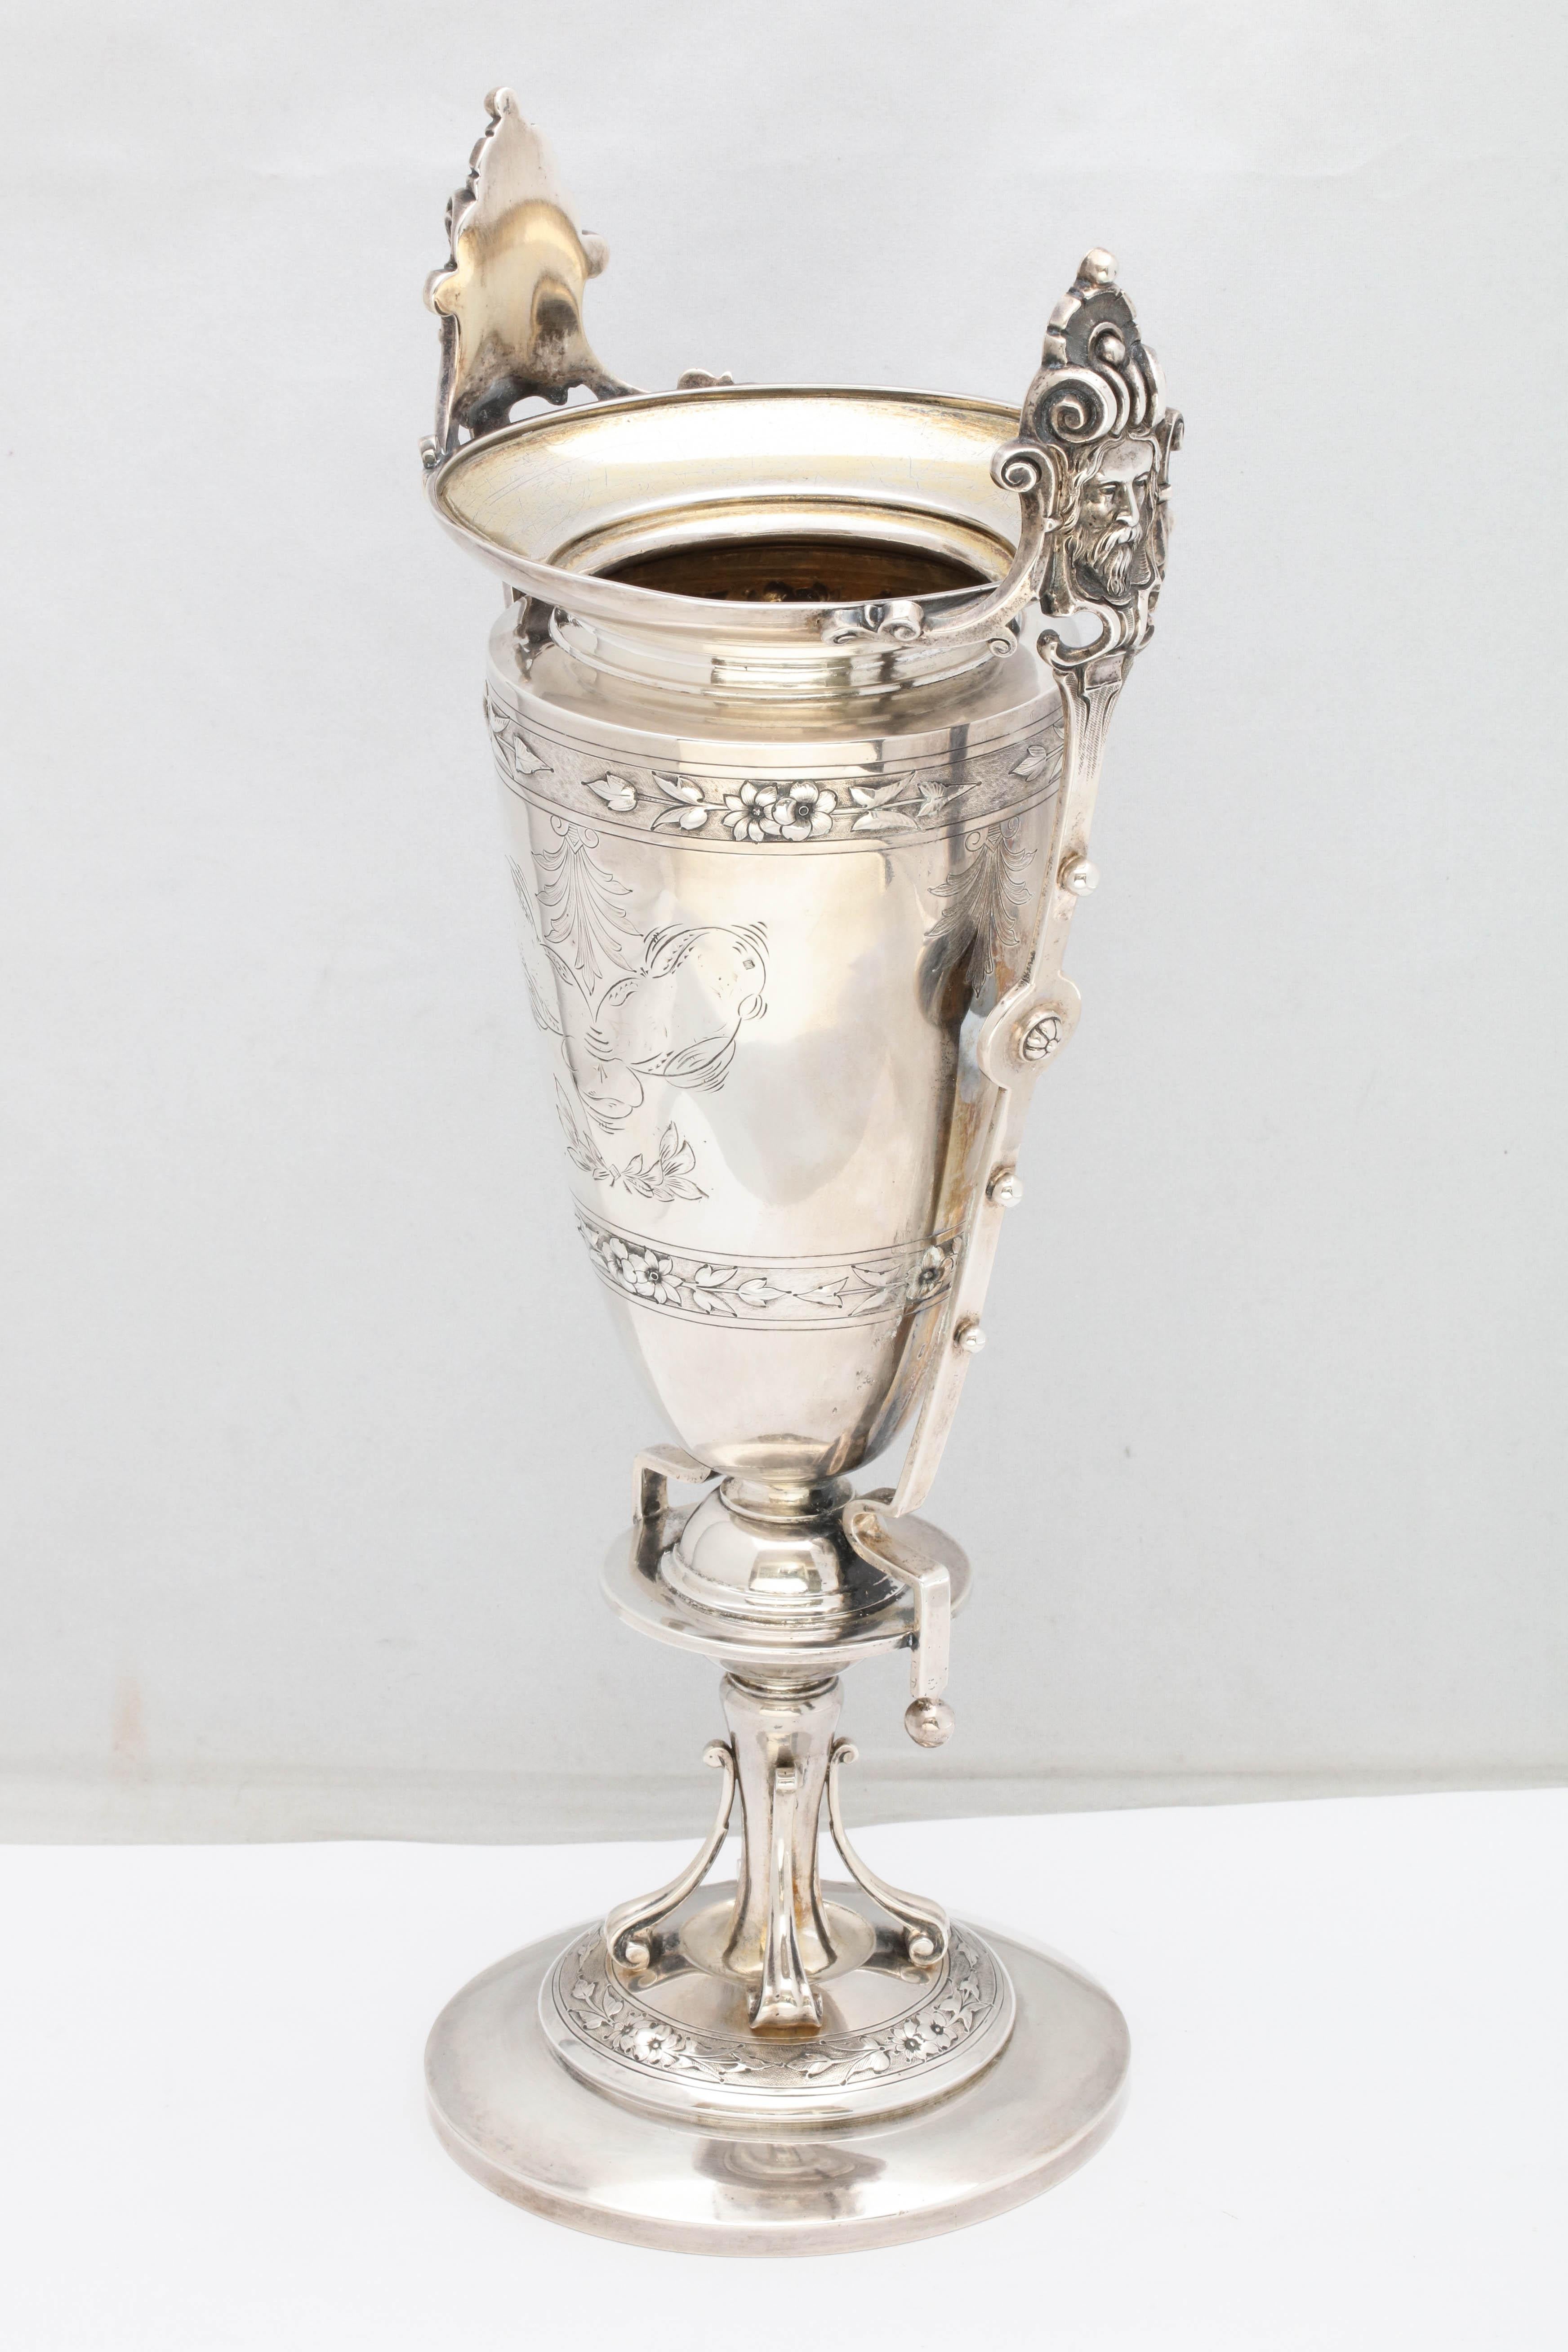 Neoclassical, sterling silver vase, Boston, Mass., circa 1870, Shreve, Stanwood and Co. - makers. Handles are topped by bearded masks. Some etched work. Stepped up circular base. Measures: 13 1/2 inches high x over 4 3/4 inches diameter of base x 4